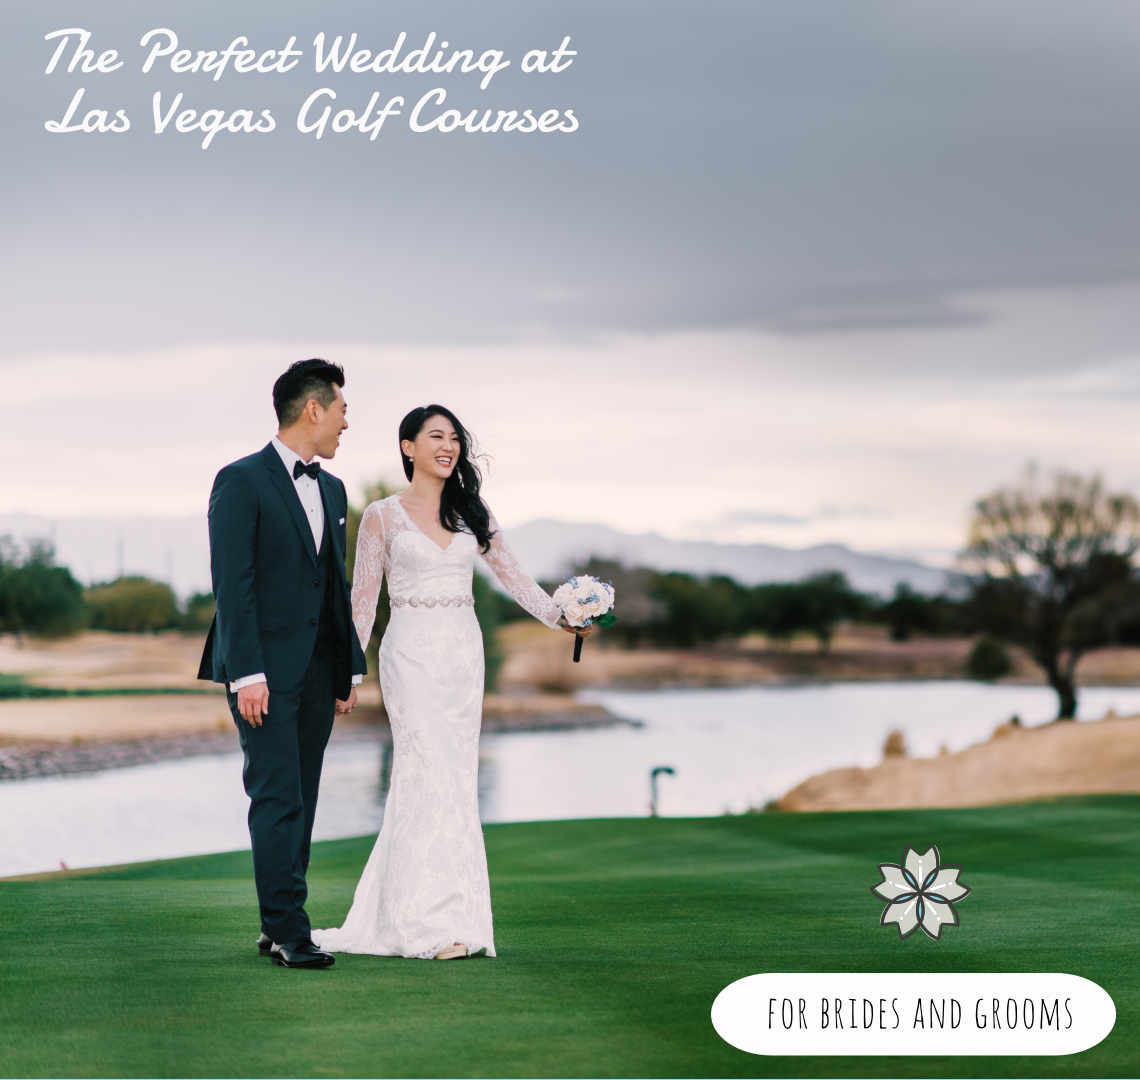 How to plan the perfect wedding at Las Vegas Golf Courses